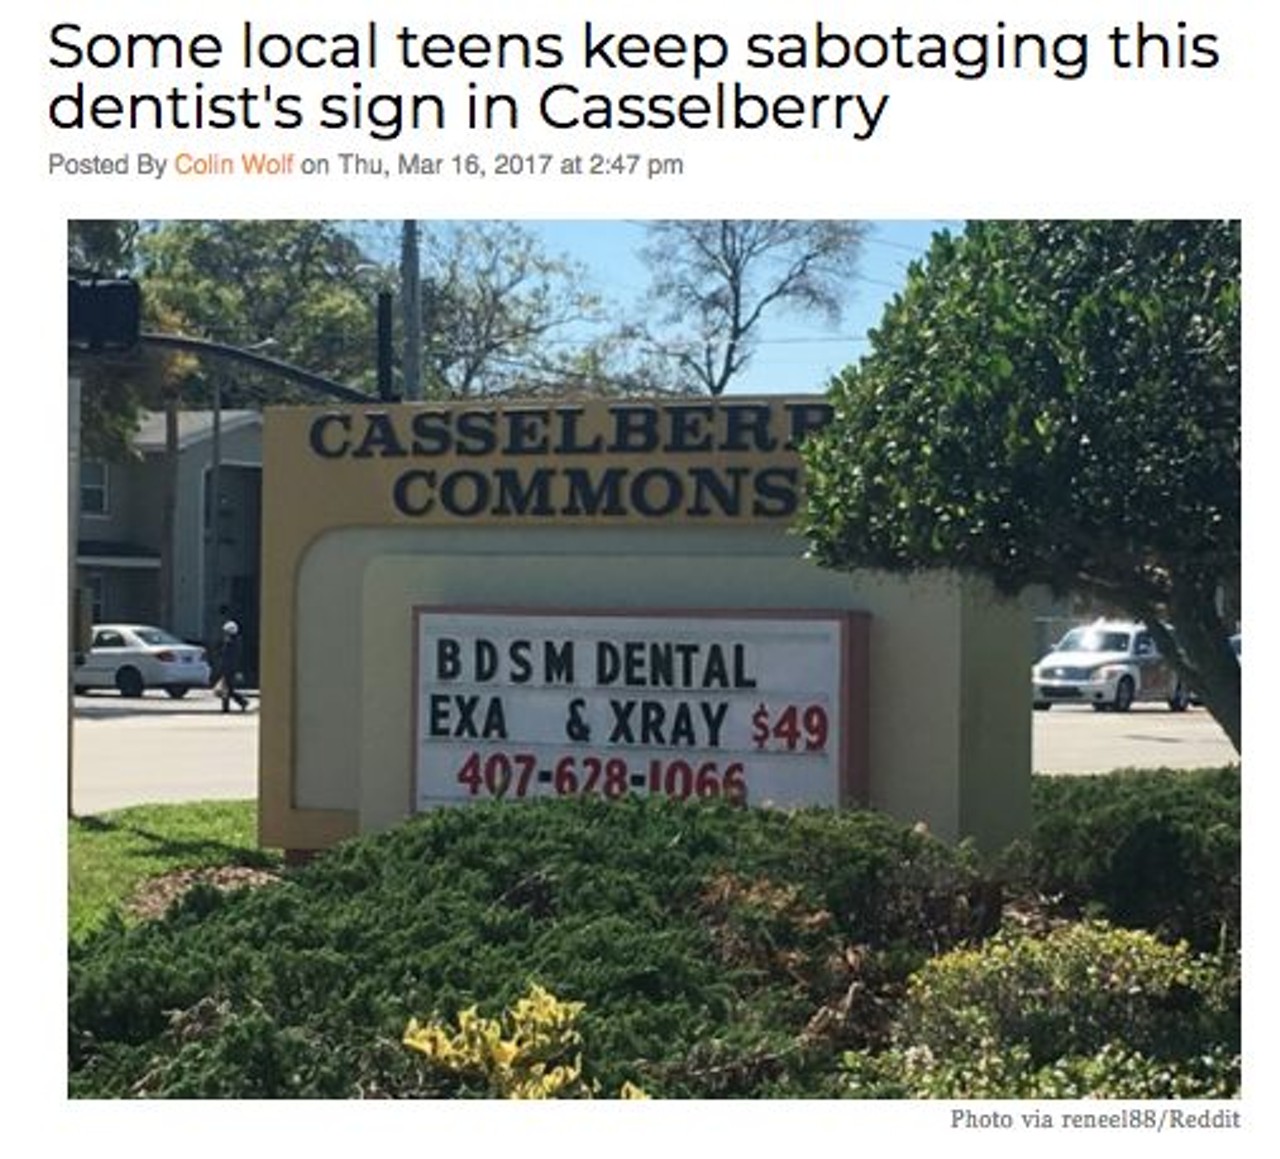 Bright Smiles Dental in Casselberry, Florida, just wants to inform the public of a great deal on X-rays and exams. However, some local teens refuse to let this happen. Read more